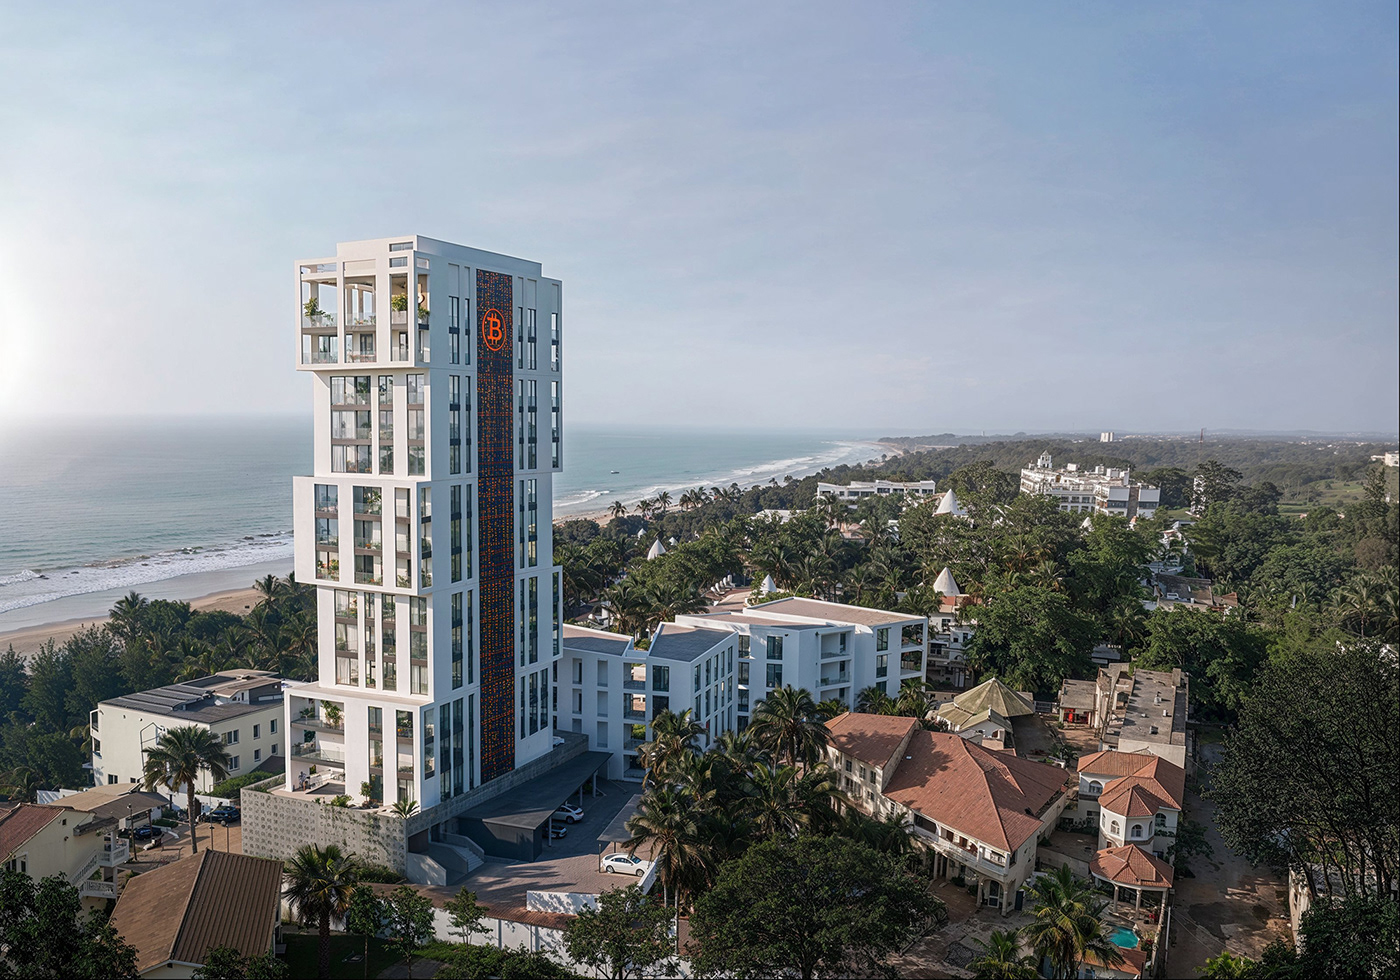 Bitcoin Tower, multi-storey residential building on a coastal landscape